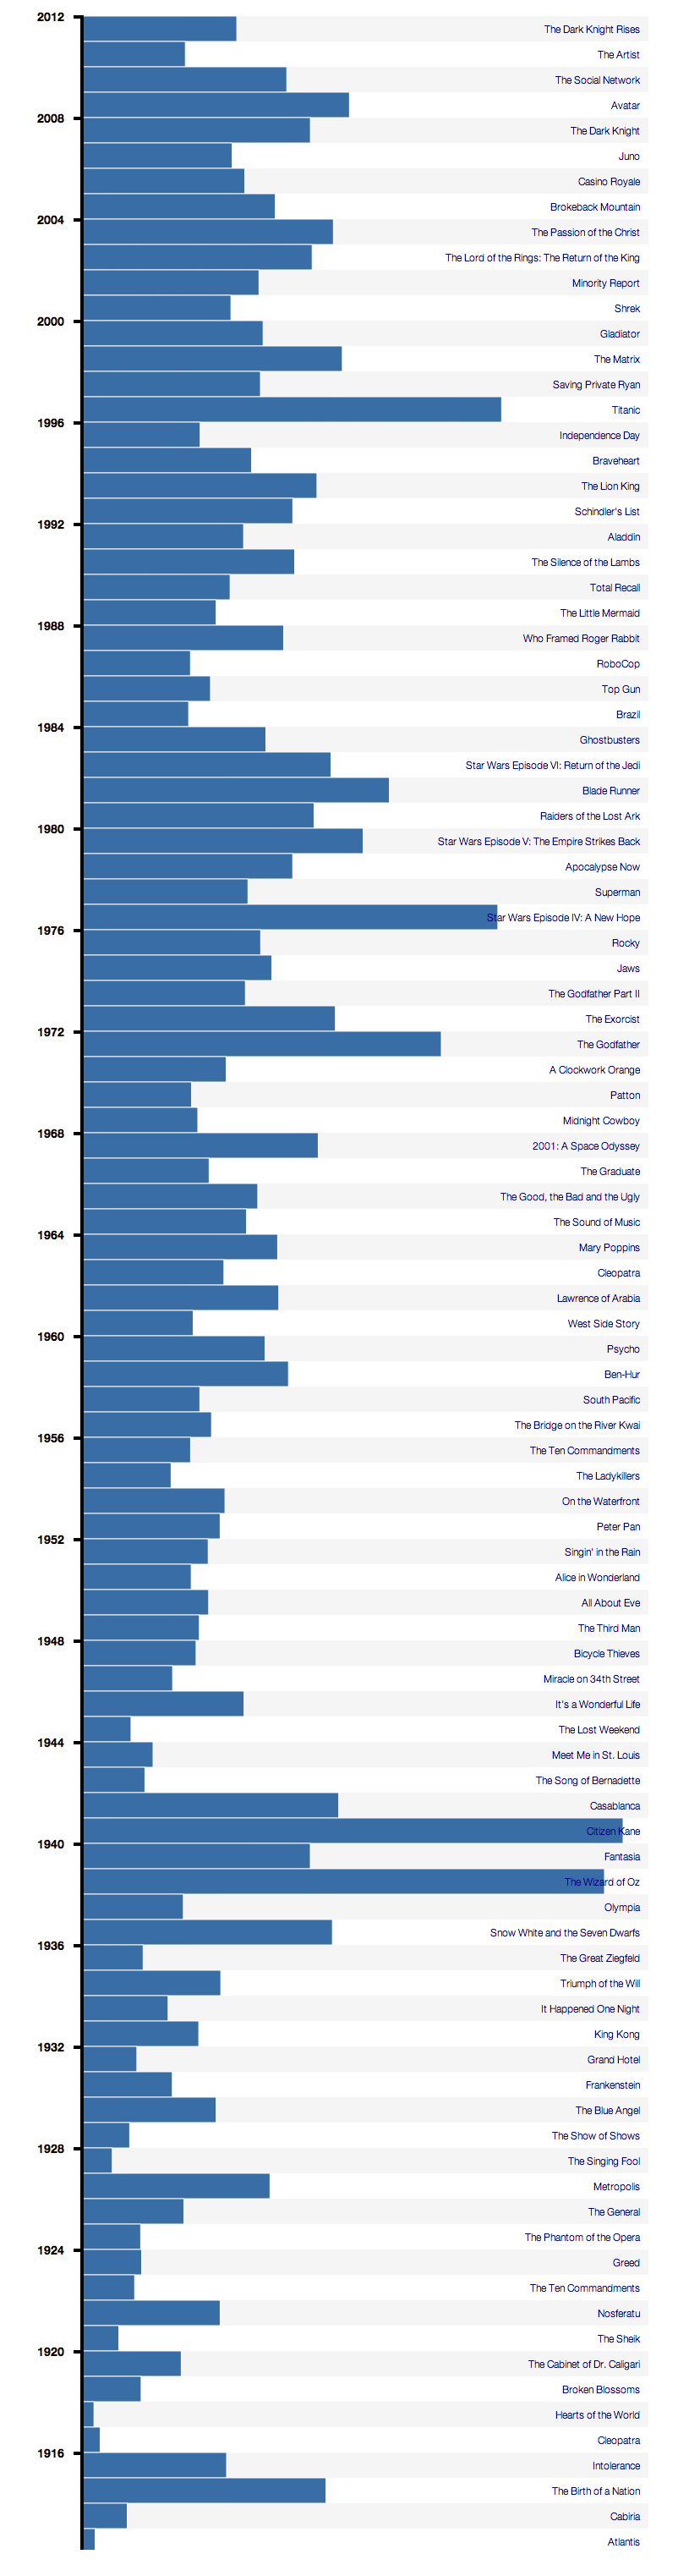 The Most Influential Movies Of The Last Century According To Wikipedia